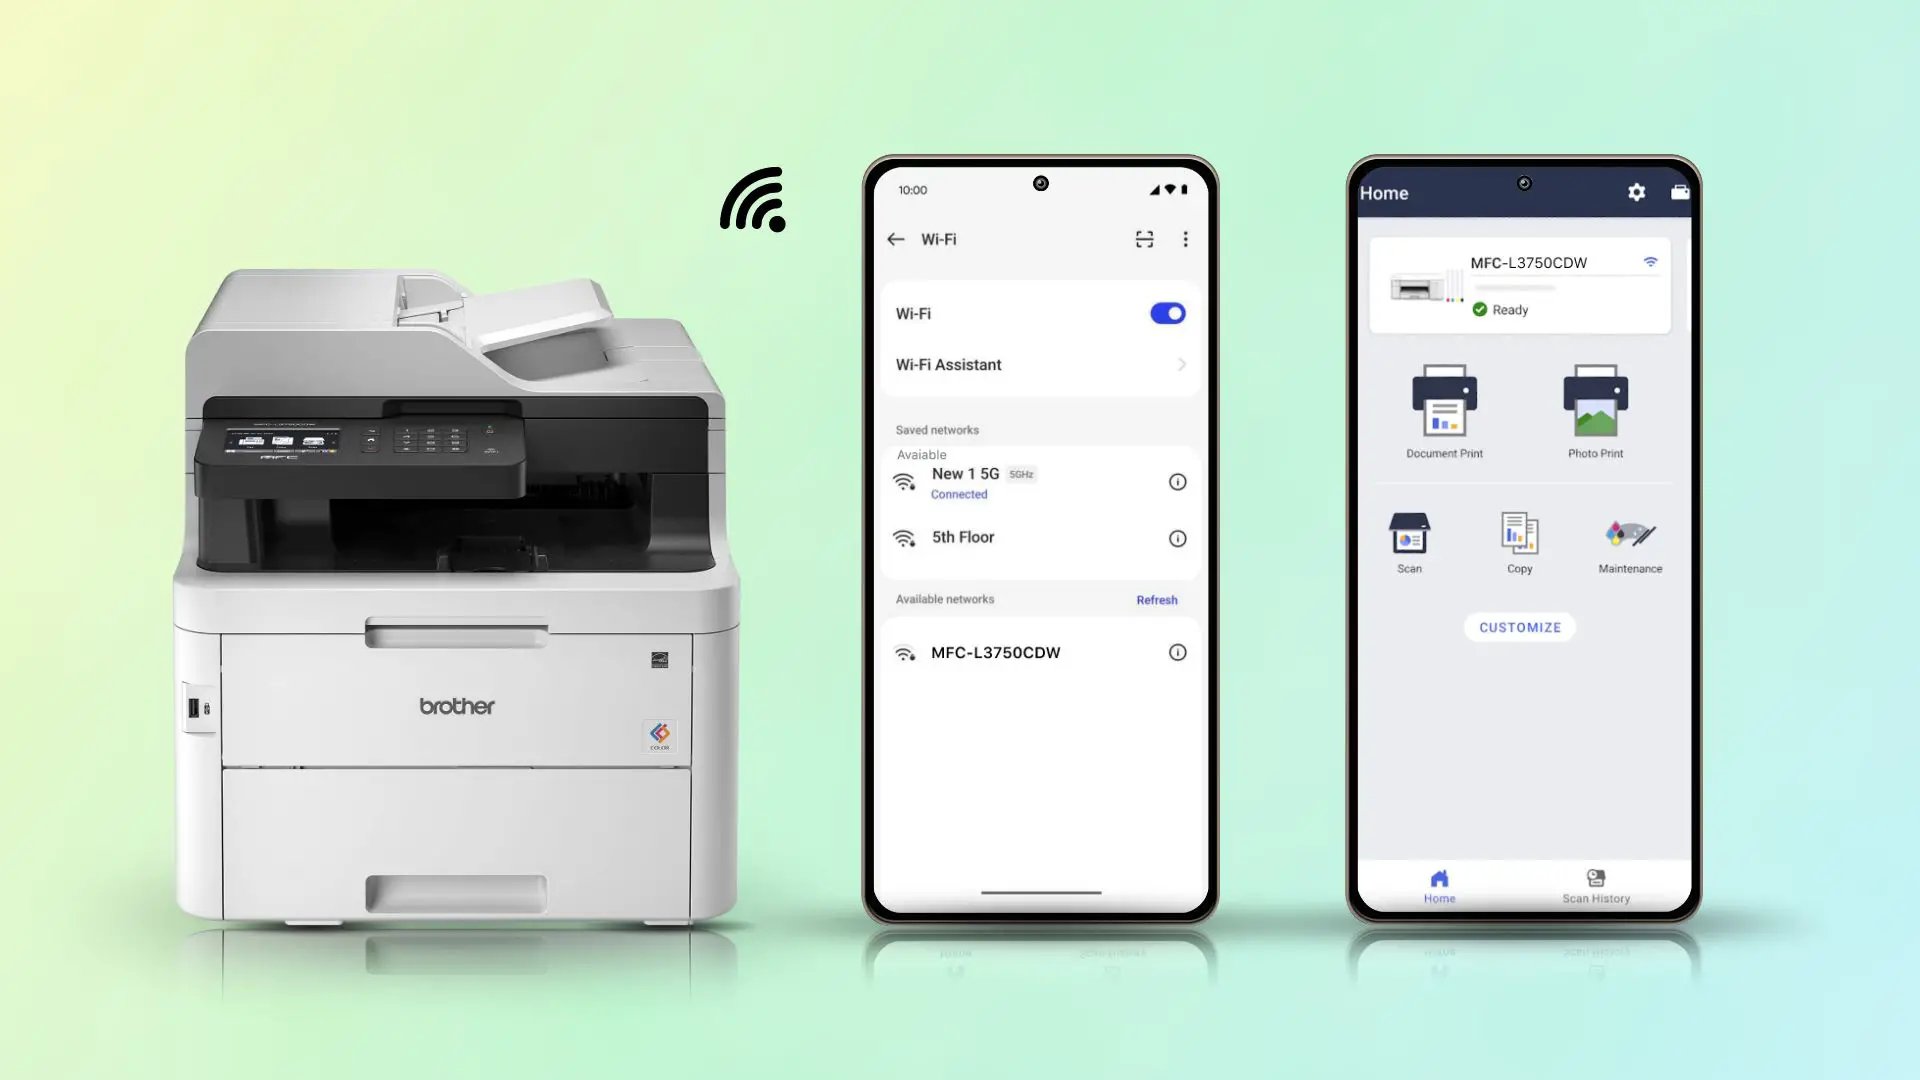 Connecting Brother printer to your phone via Wi-Fi Network